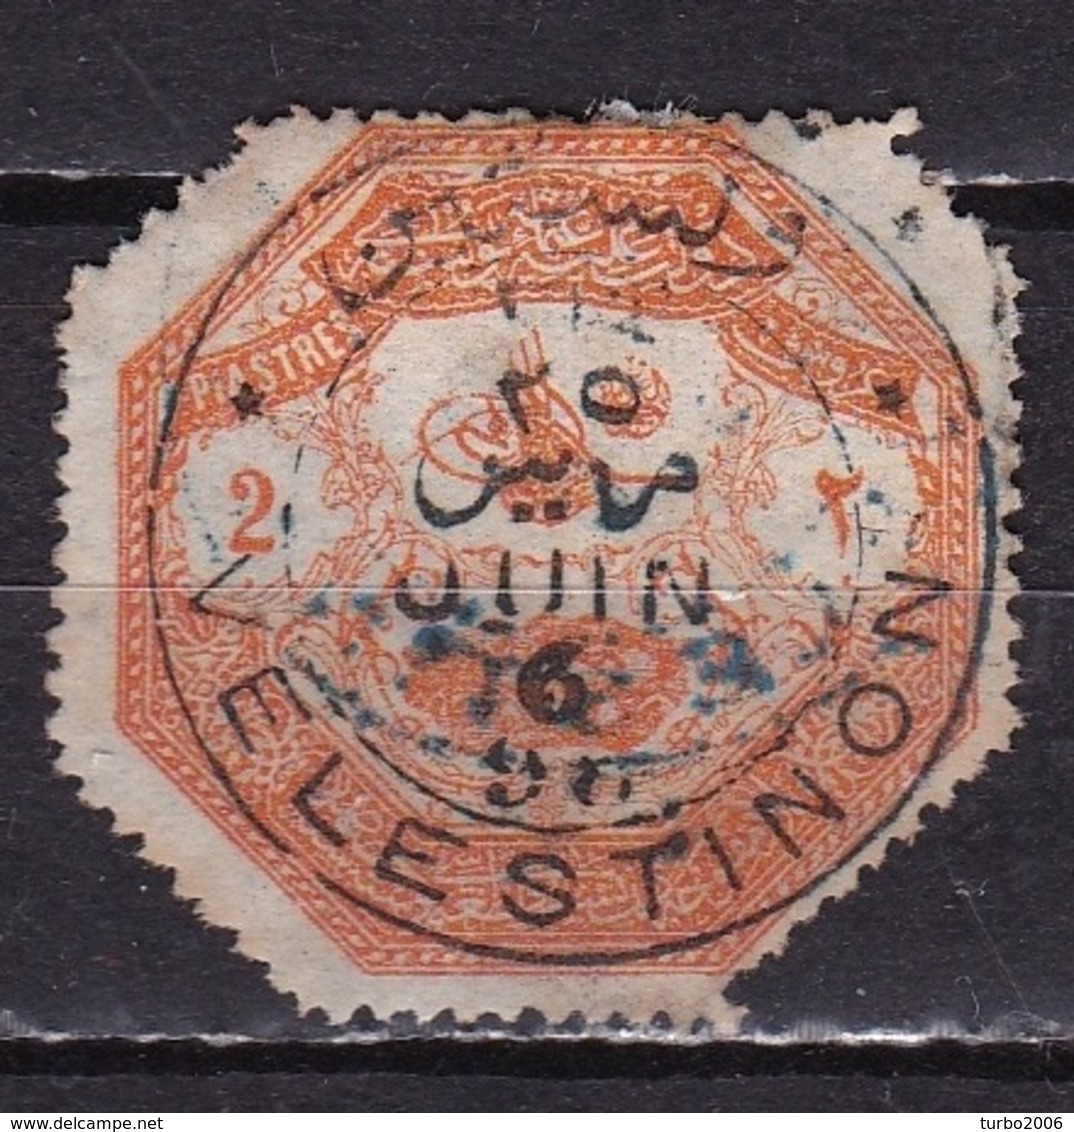 THESSALIA  1898 2 Pi Orange Used VELESTINON By The Turkish Army Of Occupation During The Greek-Turkish War Of 1897 Vl. 4 - Thessalien